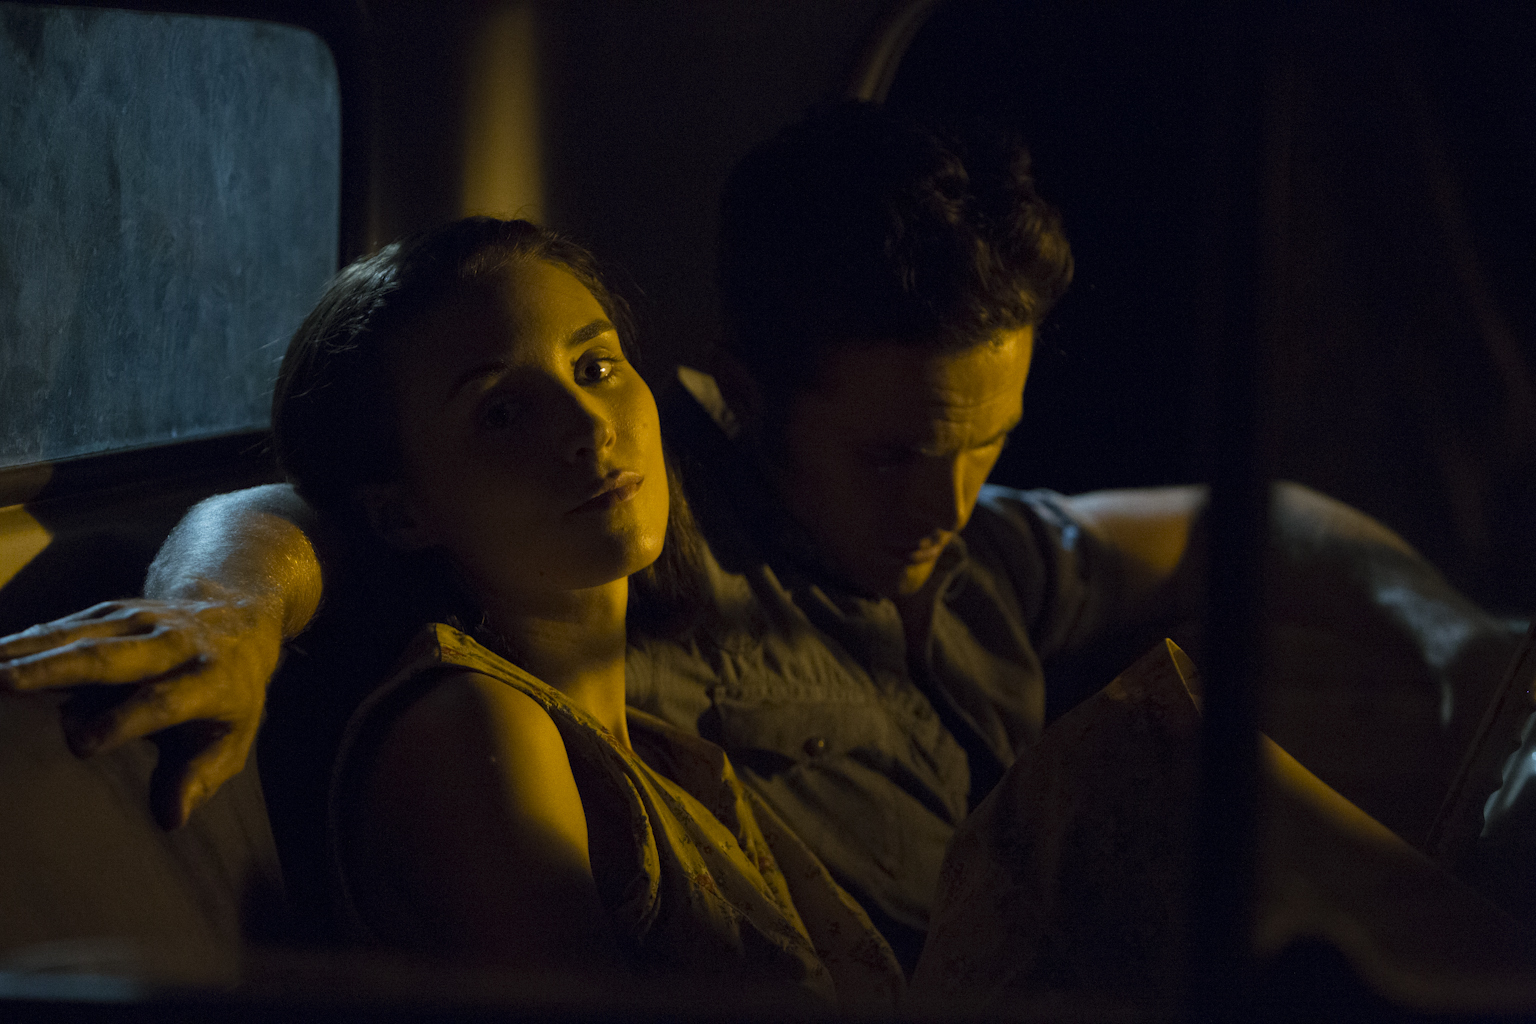 Still of Casey Affleck and Rooney Mara in Ain't Them Bodies Saints (2013)